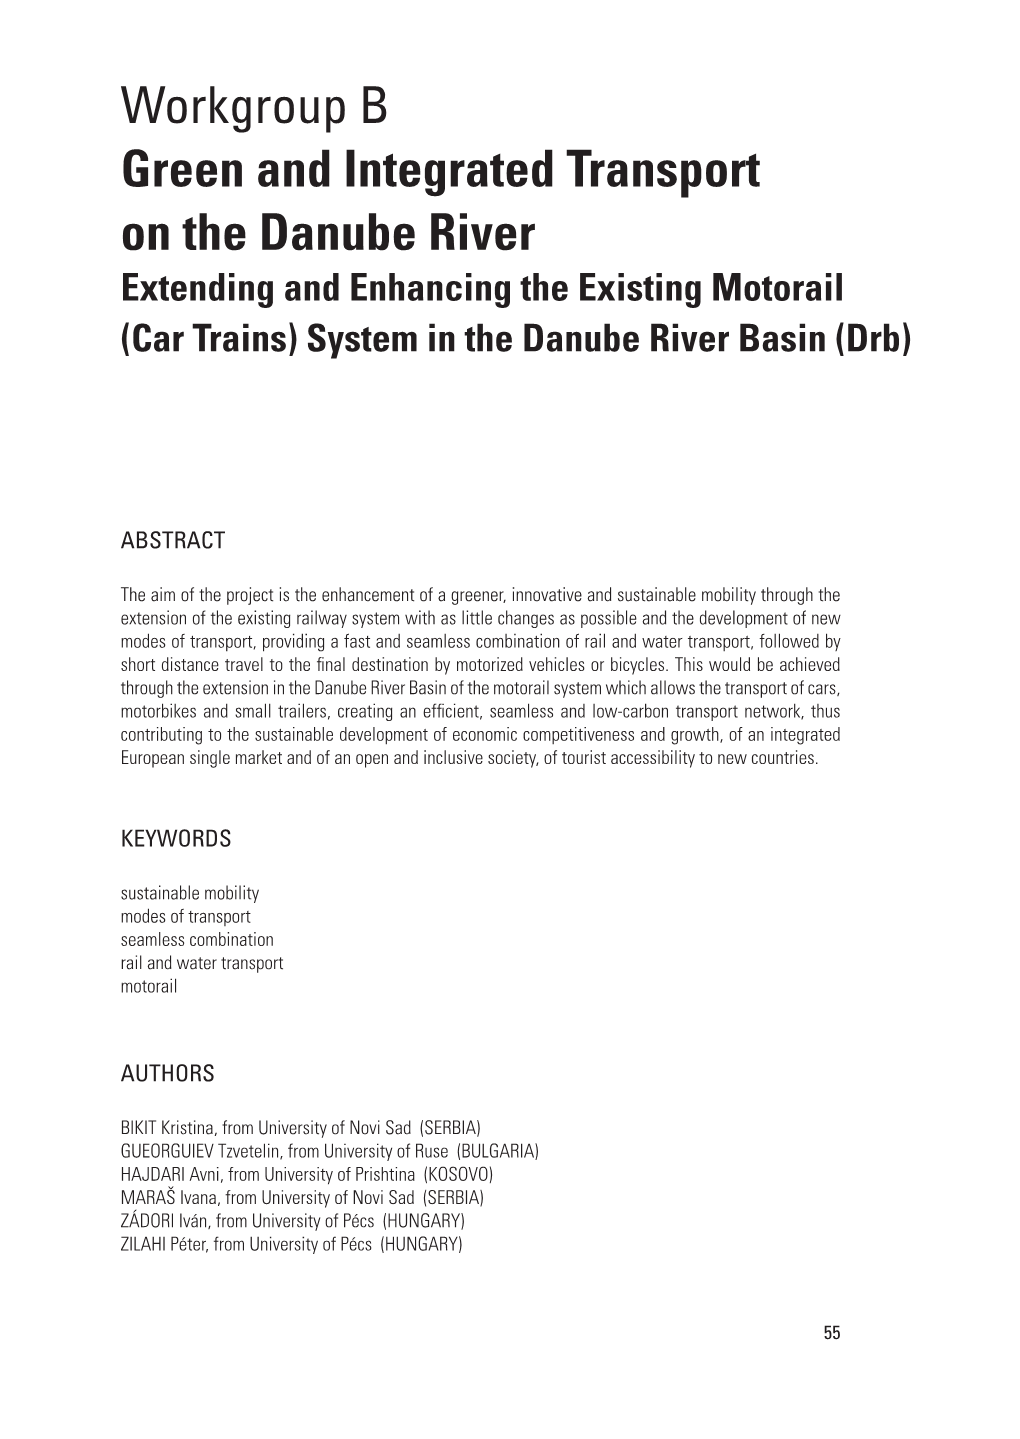 Workgroup B Green and Integrated Transport on the Danube River Extending and Enhancing the Existing Motorail (Car Trains) System in the Danube River Basin (Drb)